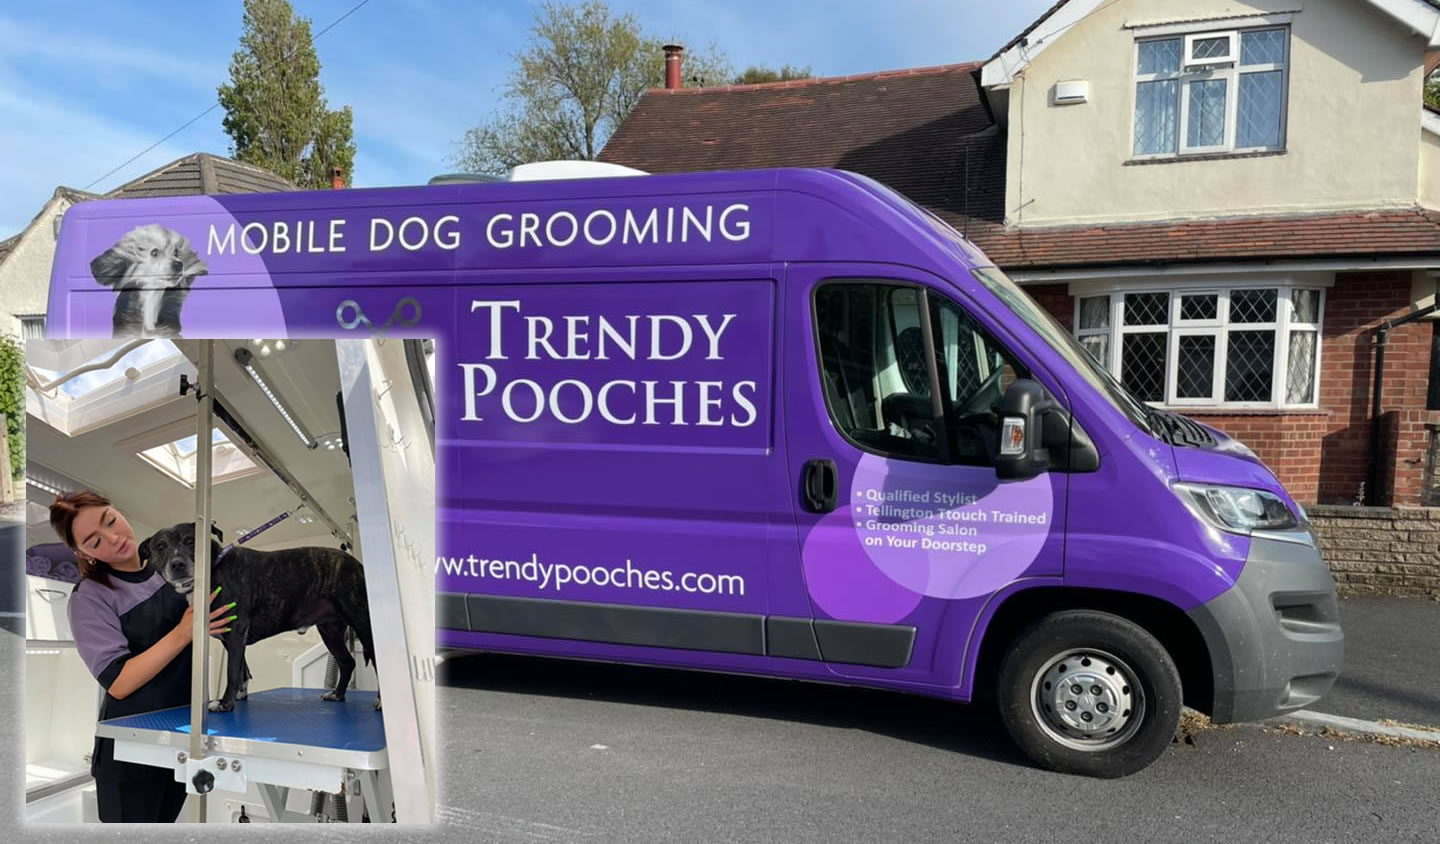 Trendy pooches franchise